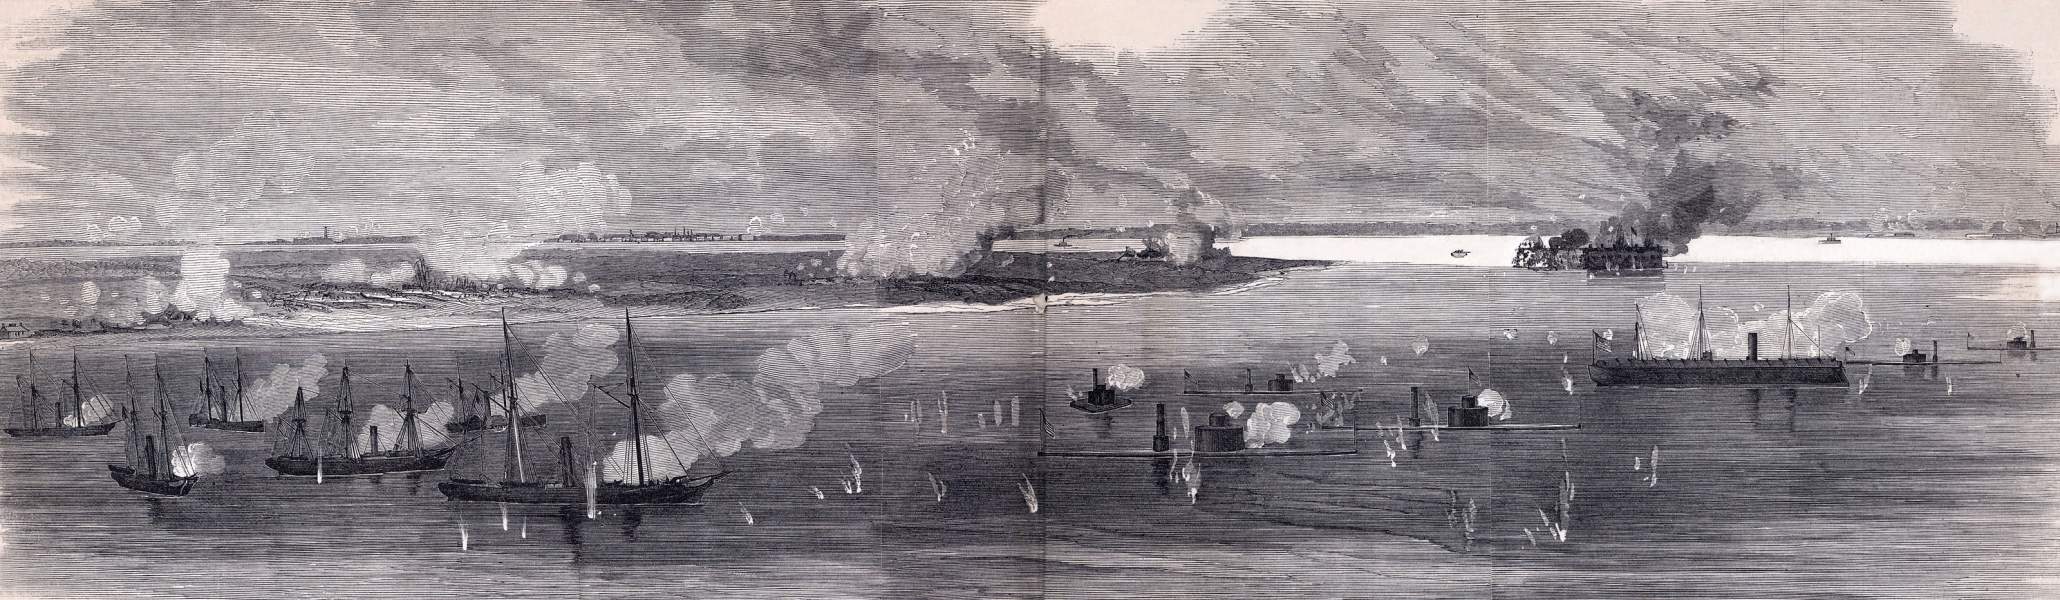 Union naval bombardment of the Confederate forts in Charleston Harbor, August 17, 1863, artist's impression, zoomable image